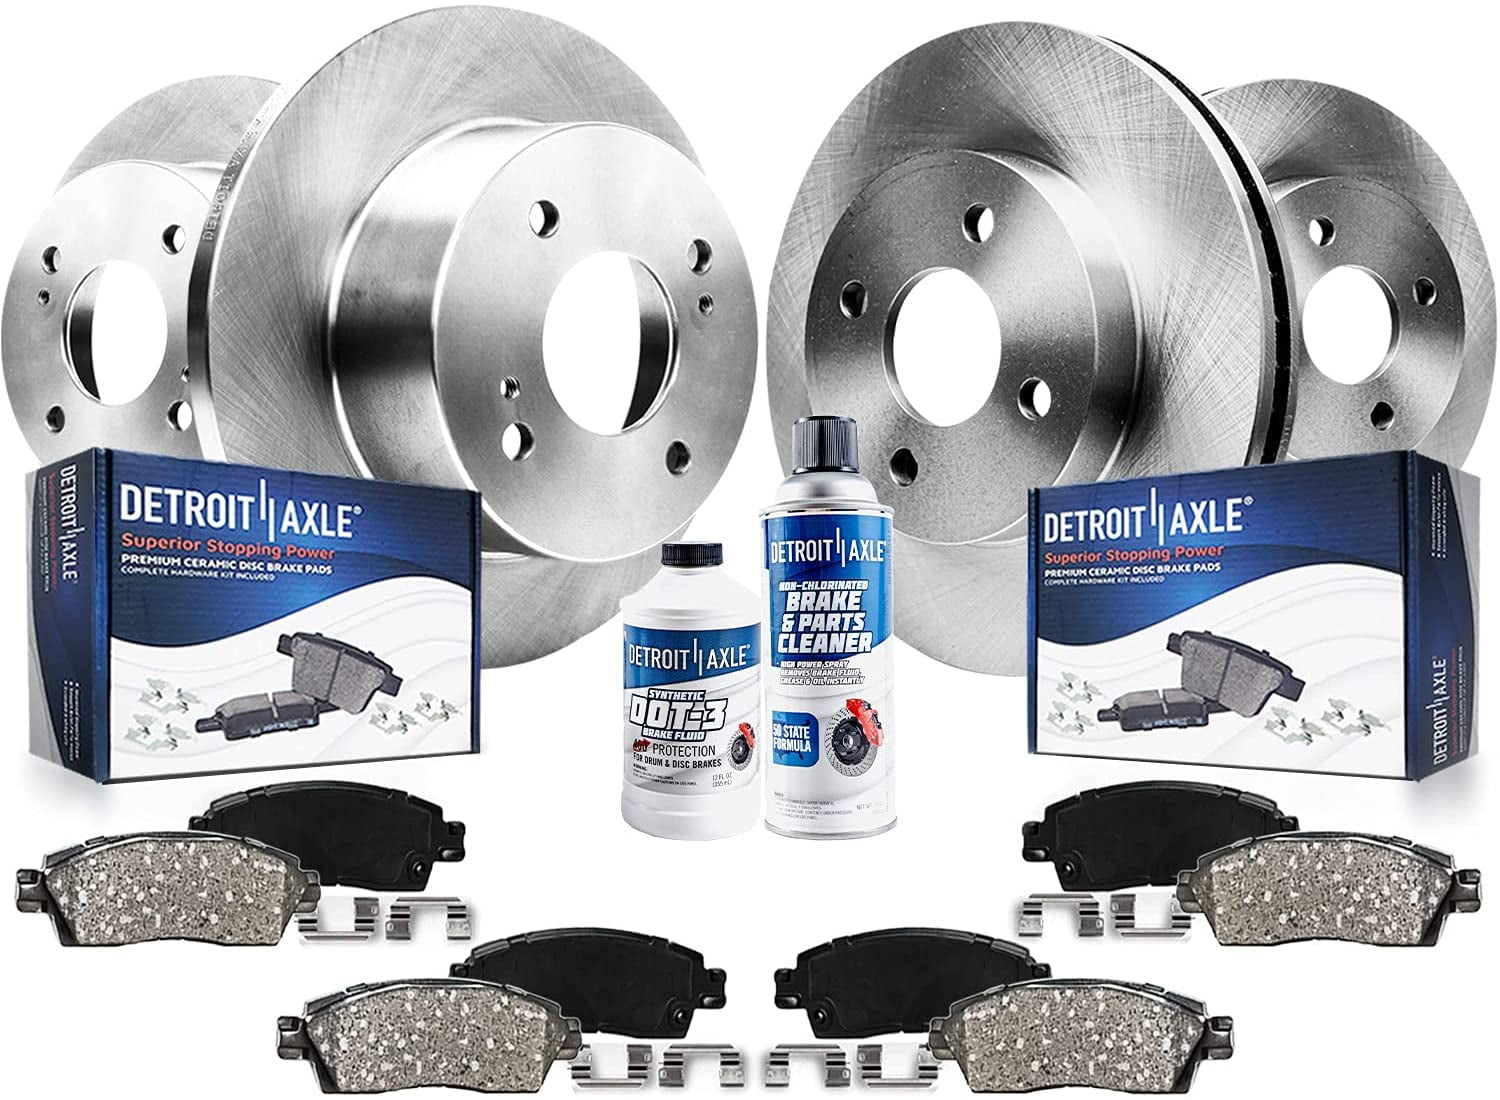 Detroit Axle Replacement for Honda Civic Insight Acura EL 262mm Front Drilled & Slotted Brakes Rotors 4pc Set Ceramic Pad 